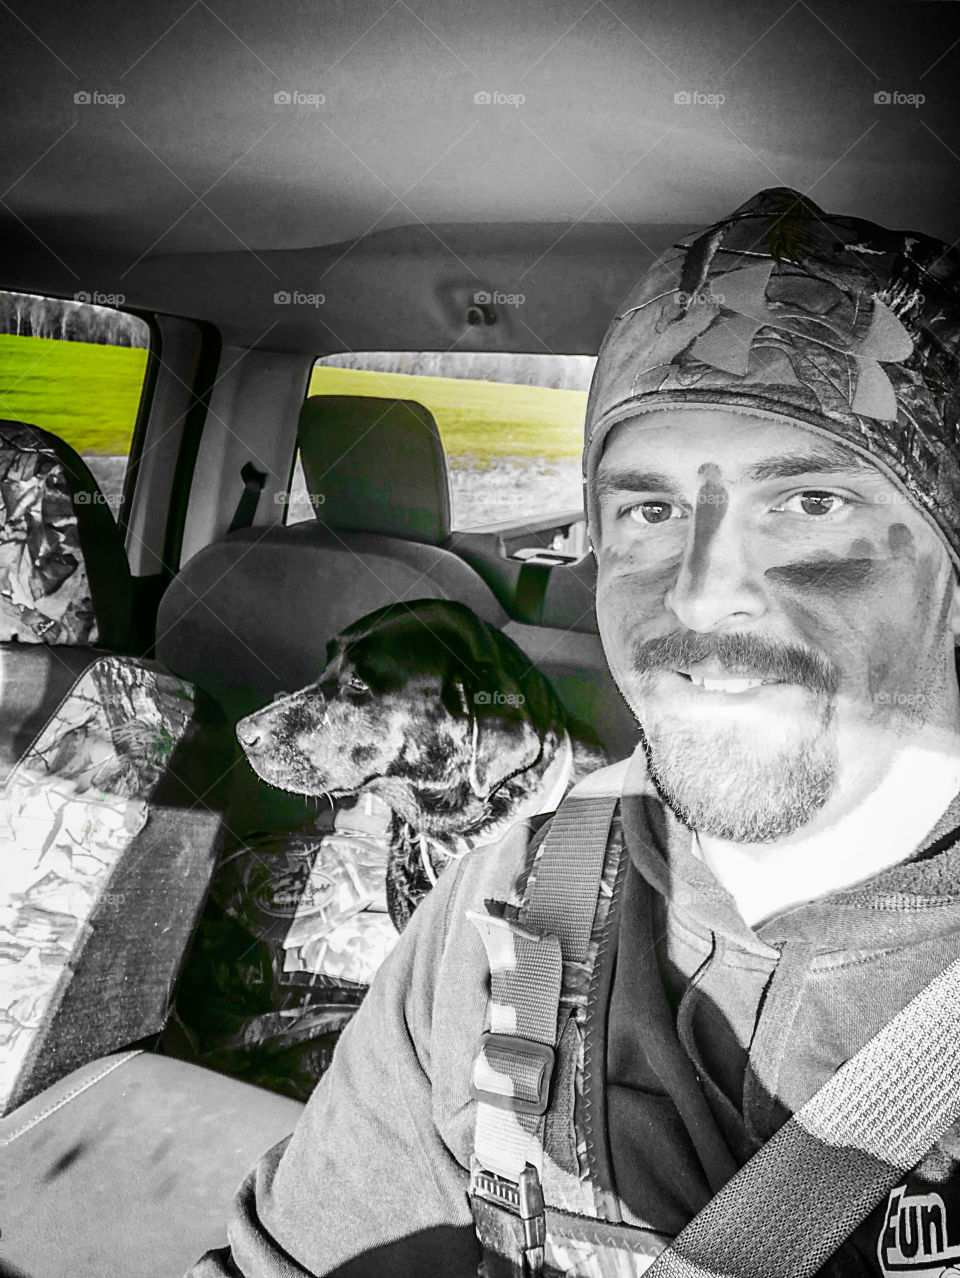 Nothing beats a morning/day spent with your favorite hunting partner!
